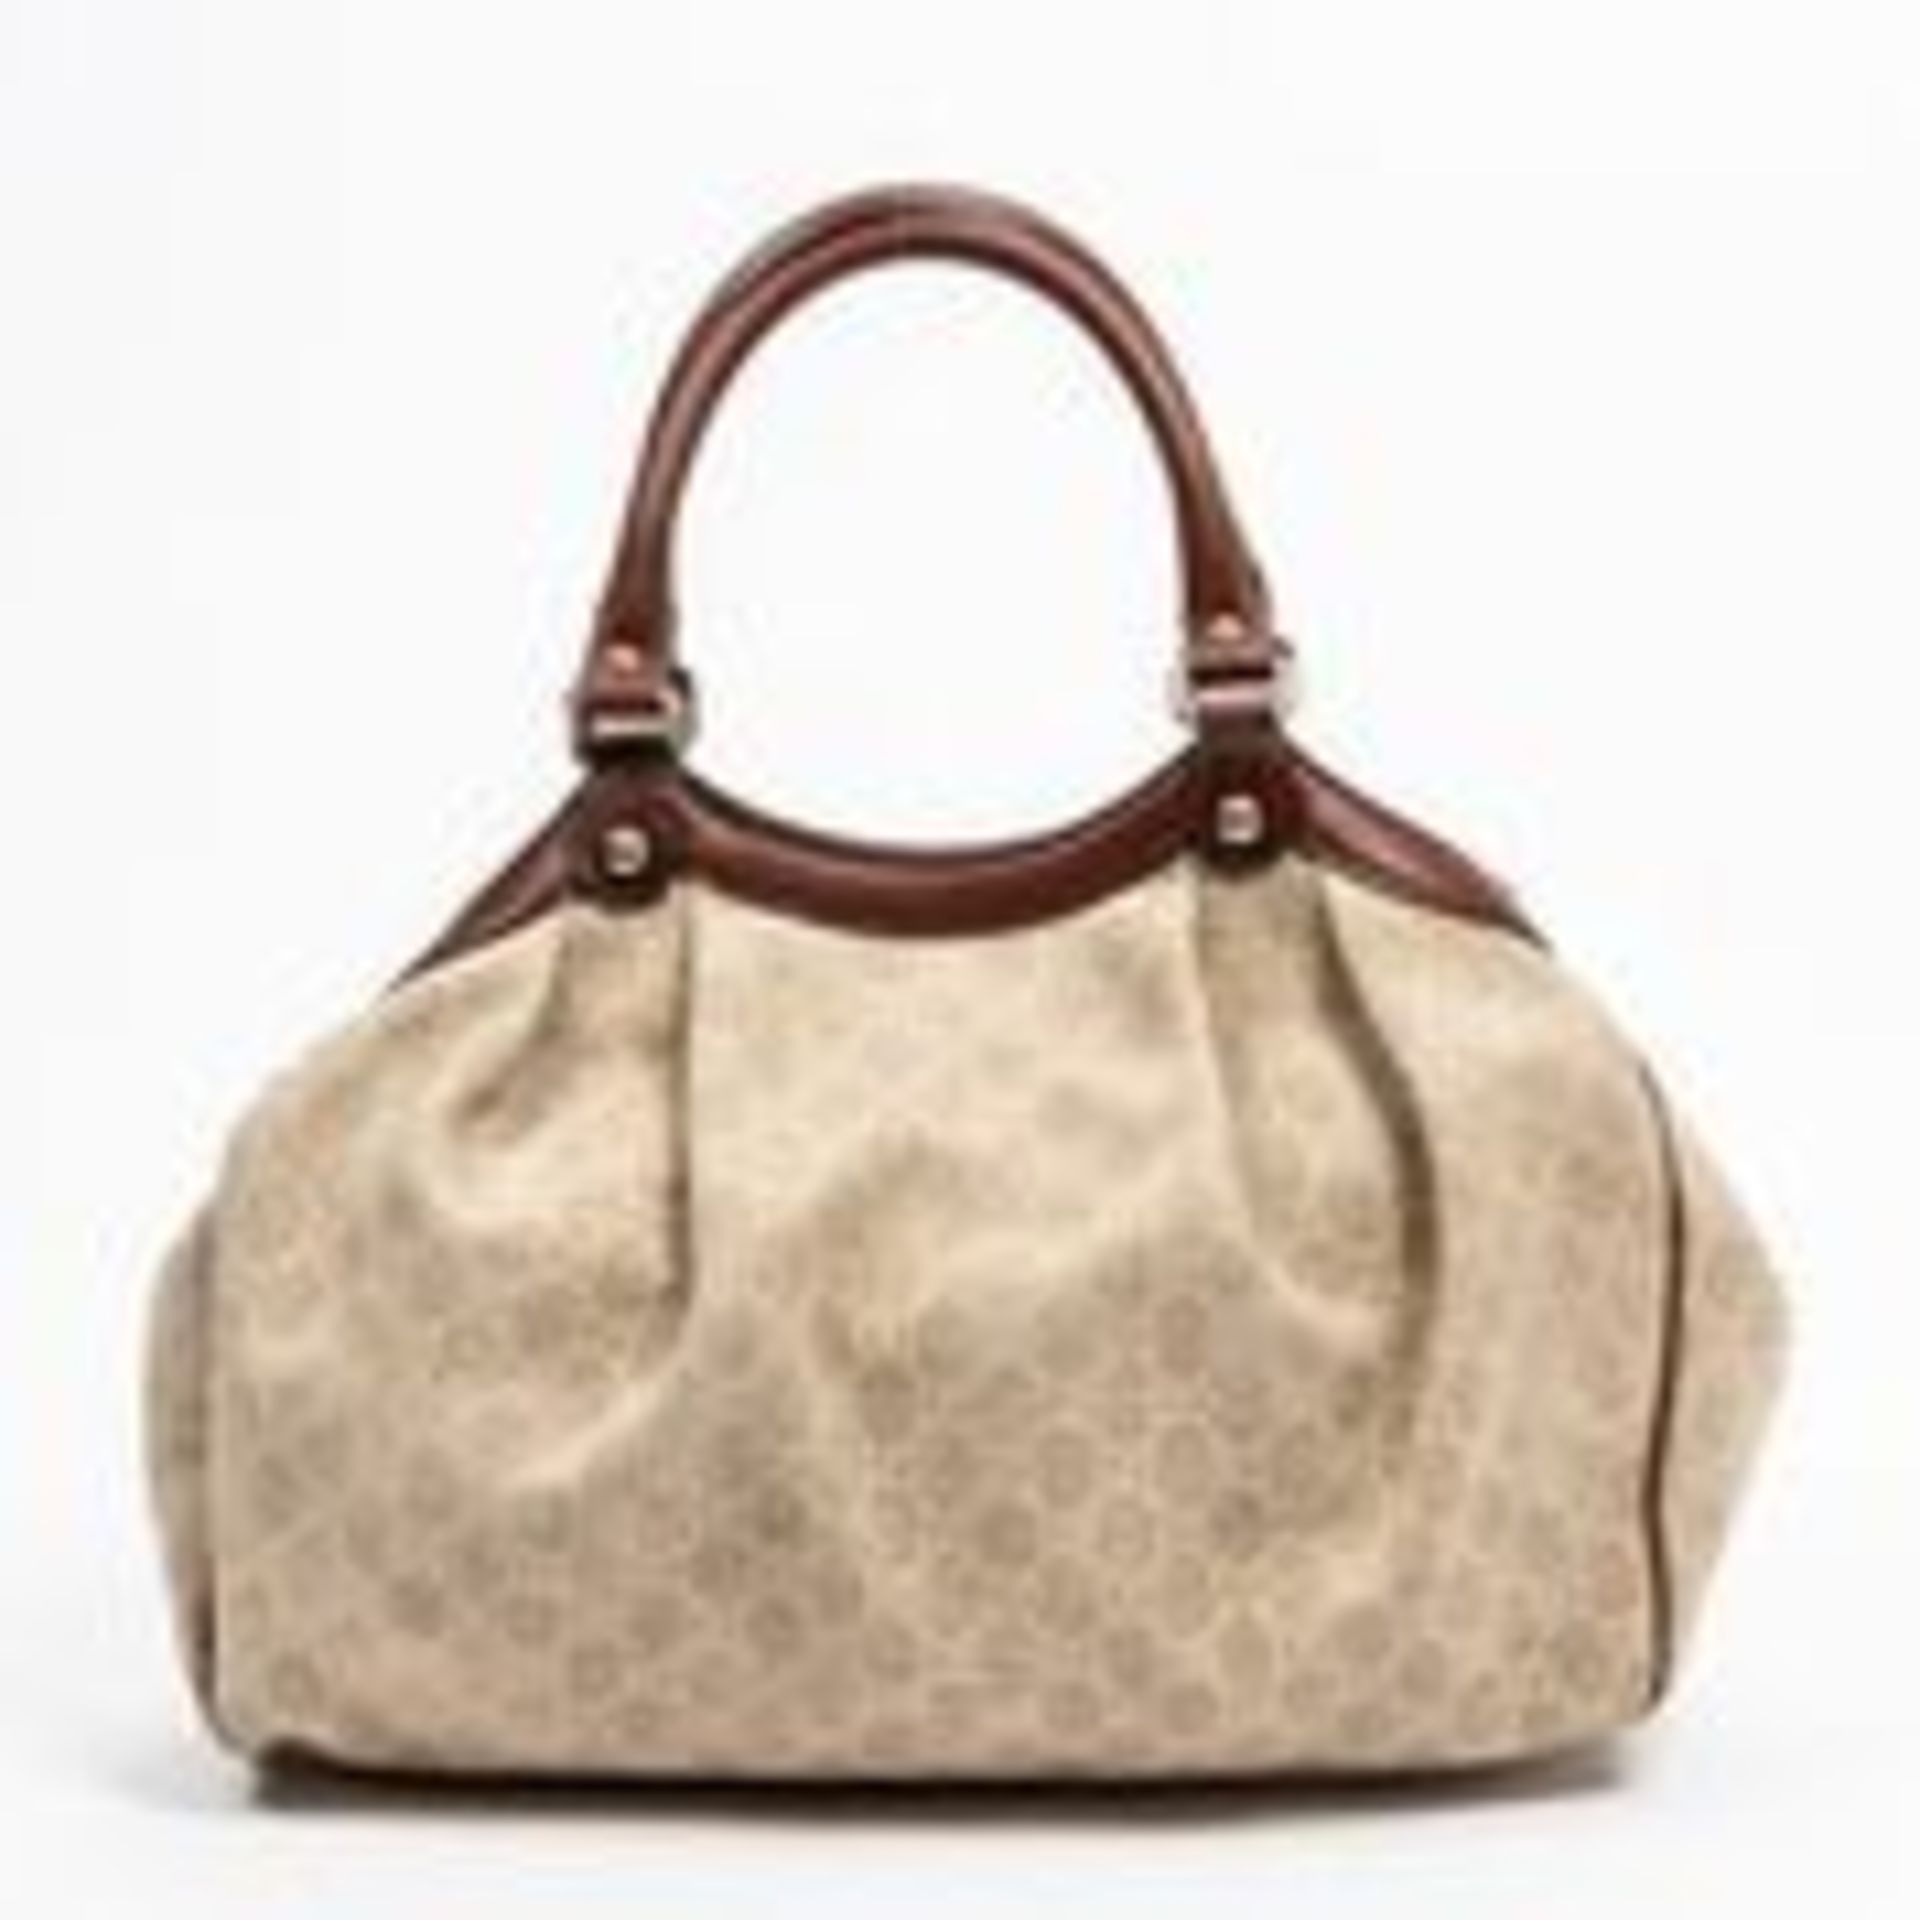 RRP £1,190 Gucci Sukey Shoulder Bag Light Beige/Brown - AAP2891 - Grade A - Please Contact Us - Image 2 of 4